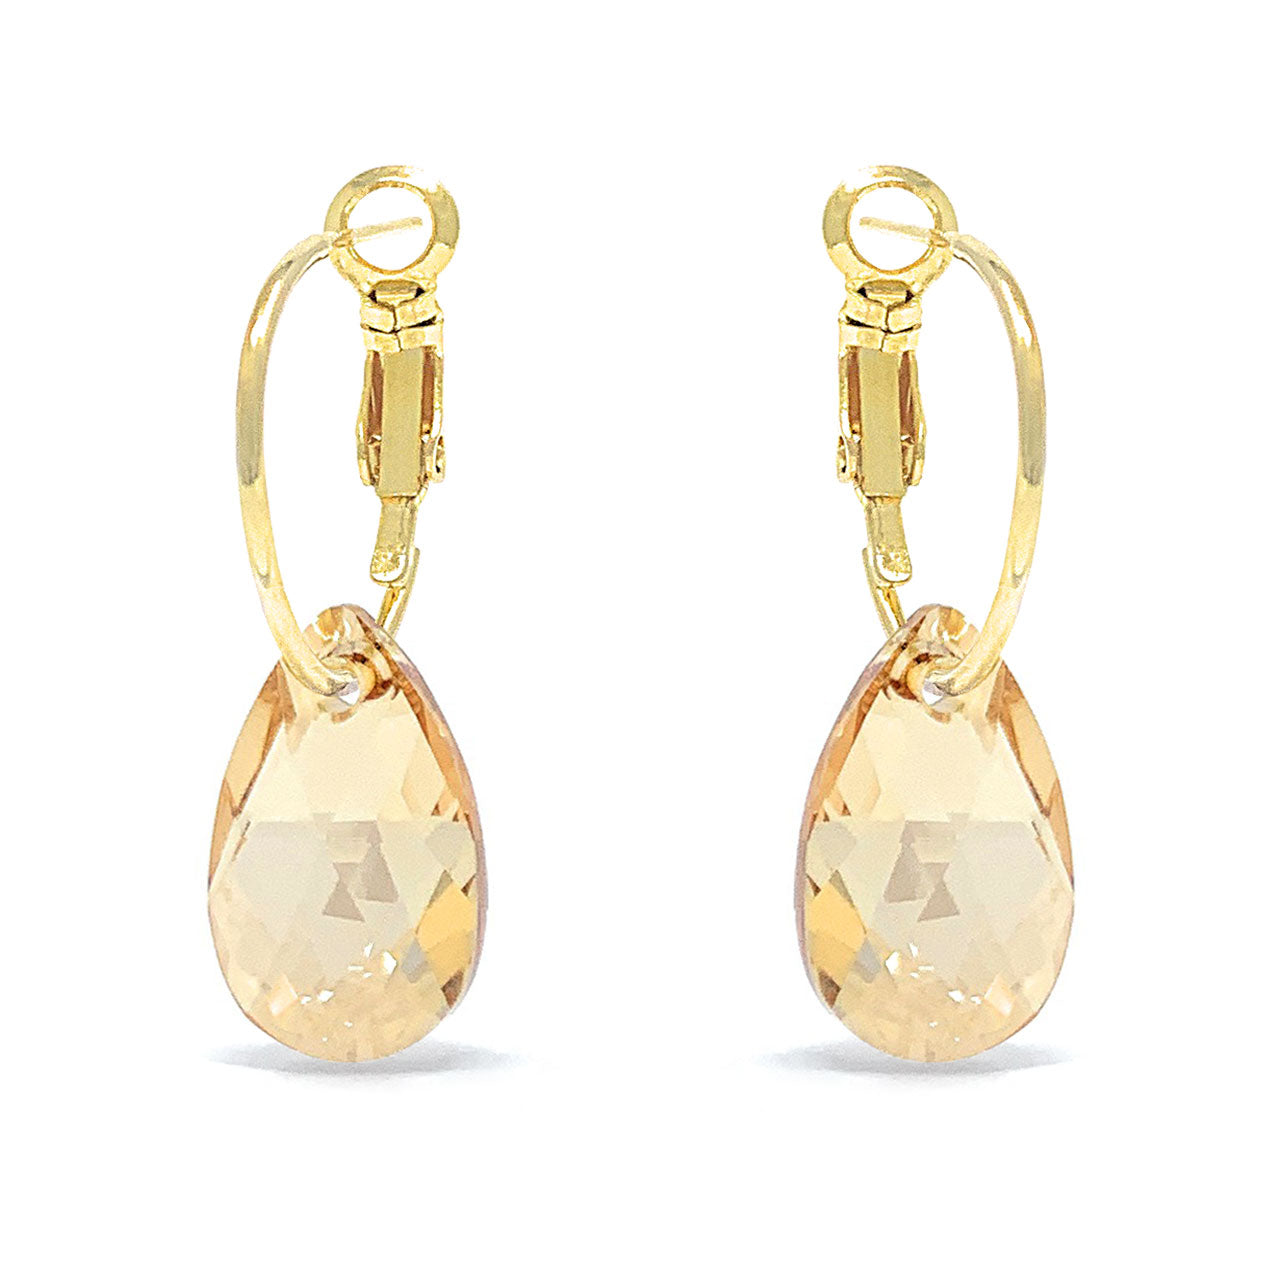 Aurora Small Drop Earrings with Yellow Beige Golden Shadow Pear Crystals from Swarovski Gold Plated - Ed Heart